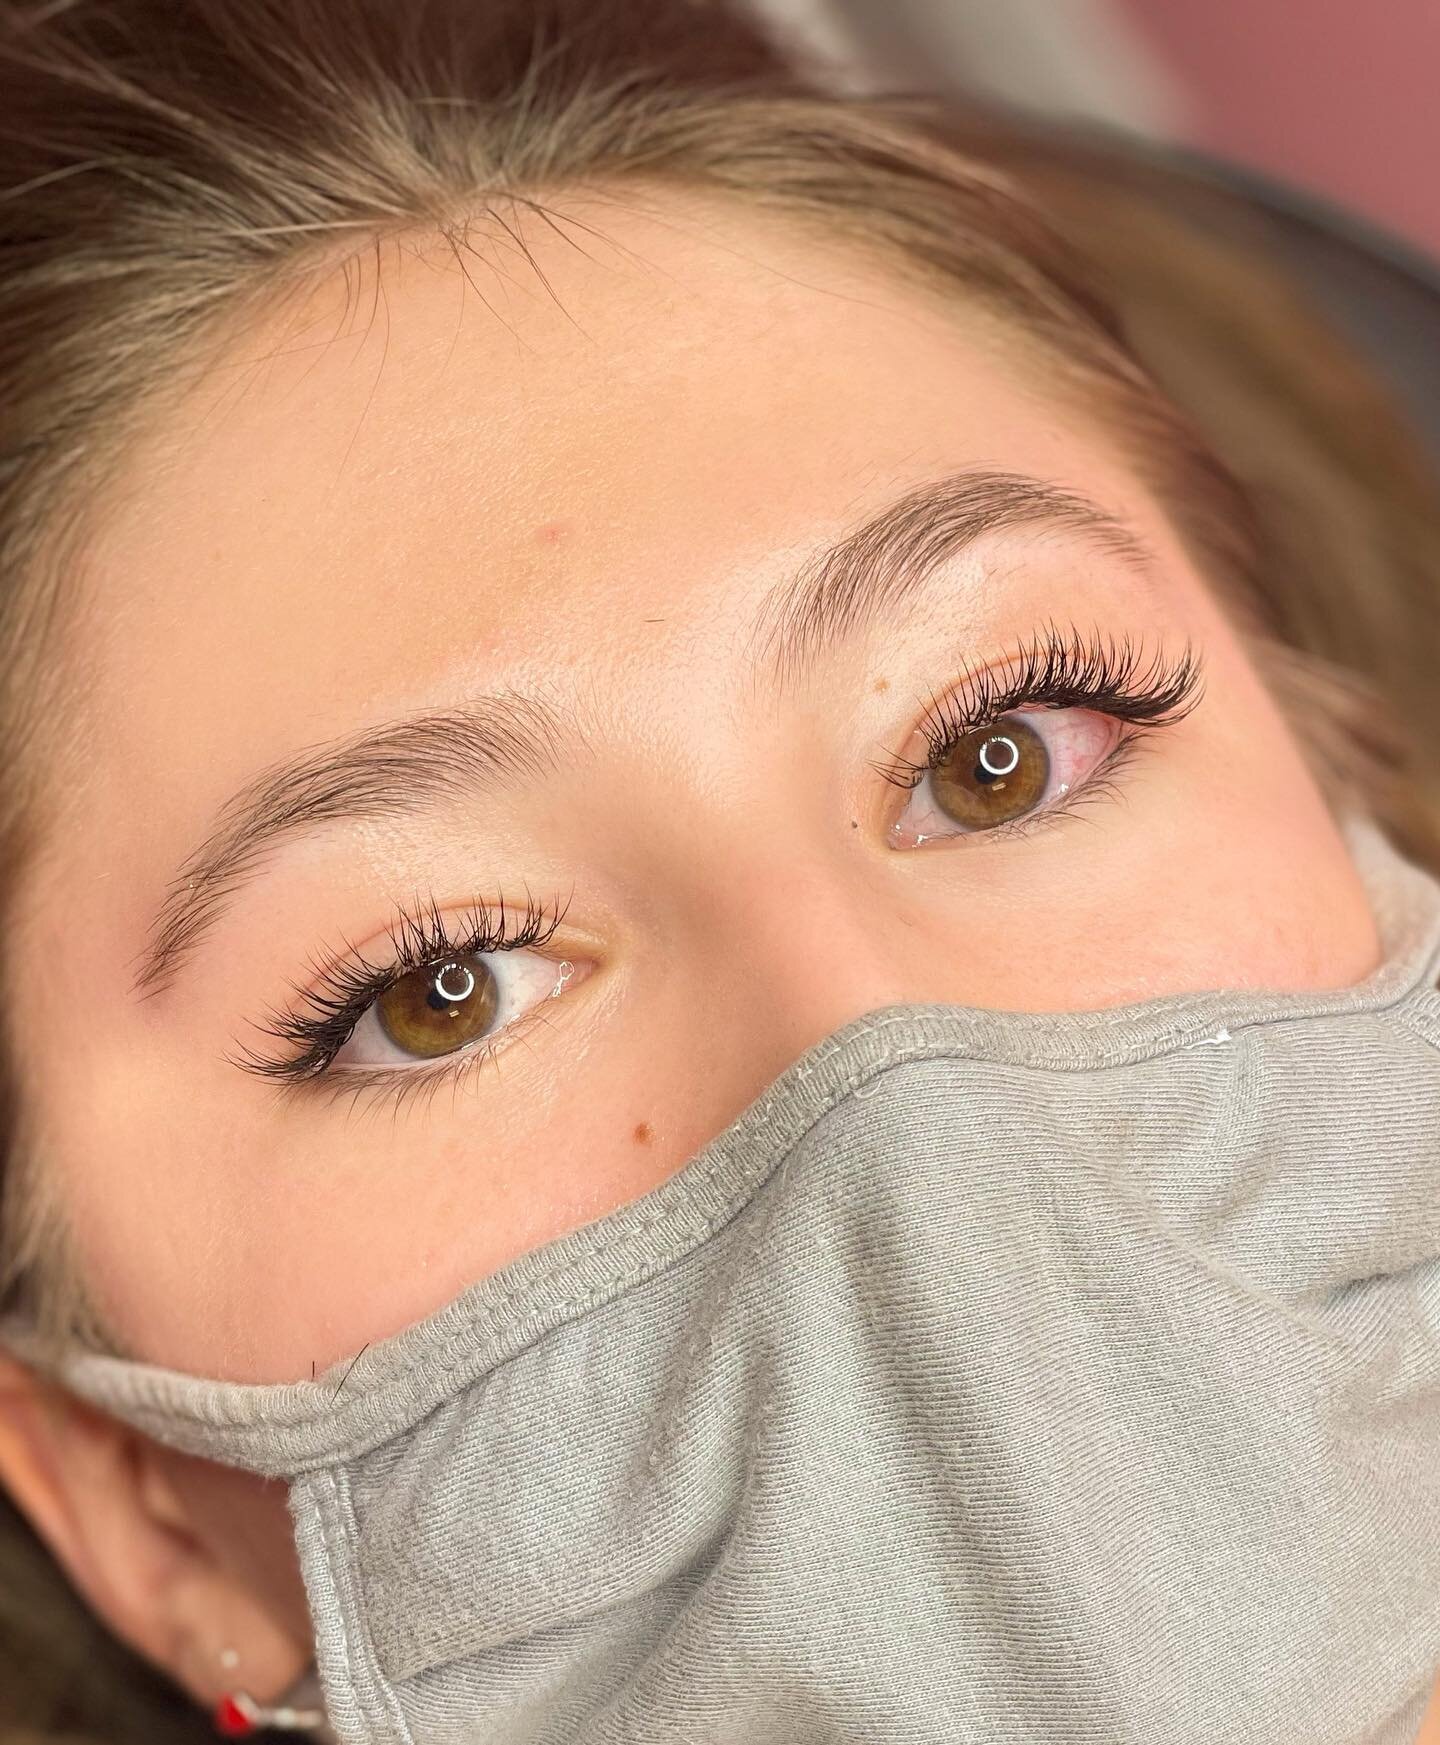 A light and dreamy classic set by Maddy🤍
We have openings this week! Click the link in bio to book🪴 

#wilmingtonnclashes #wilmingtonlashes #nclashes #uncw #lelandlashes #hampsteadlashes